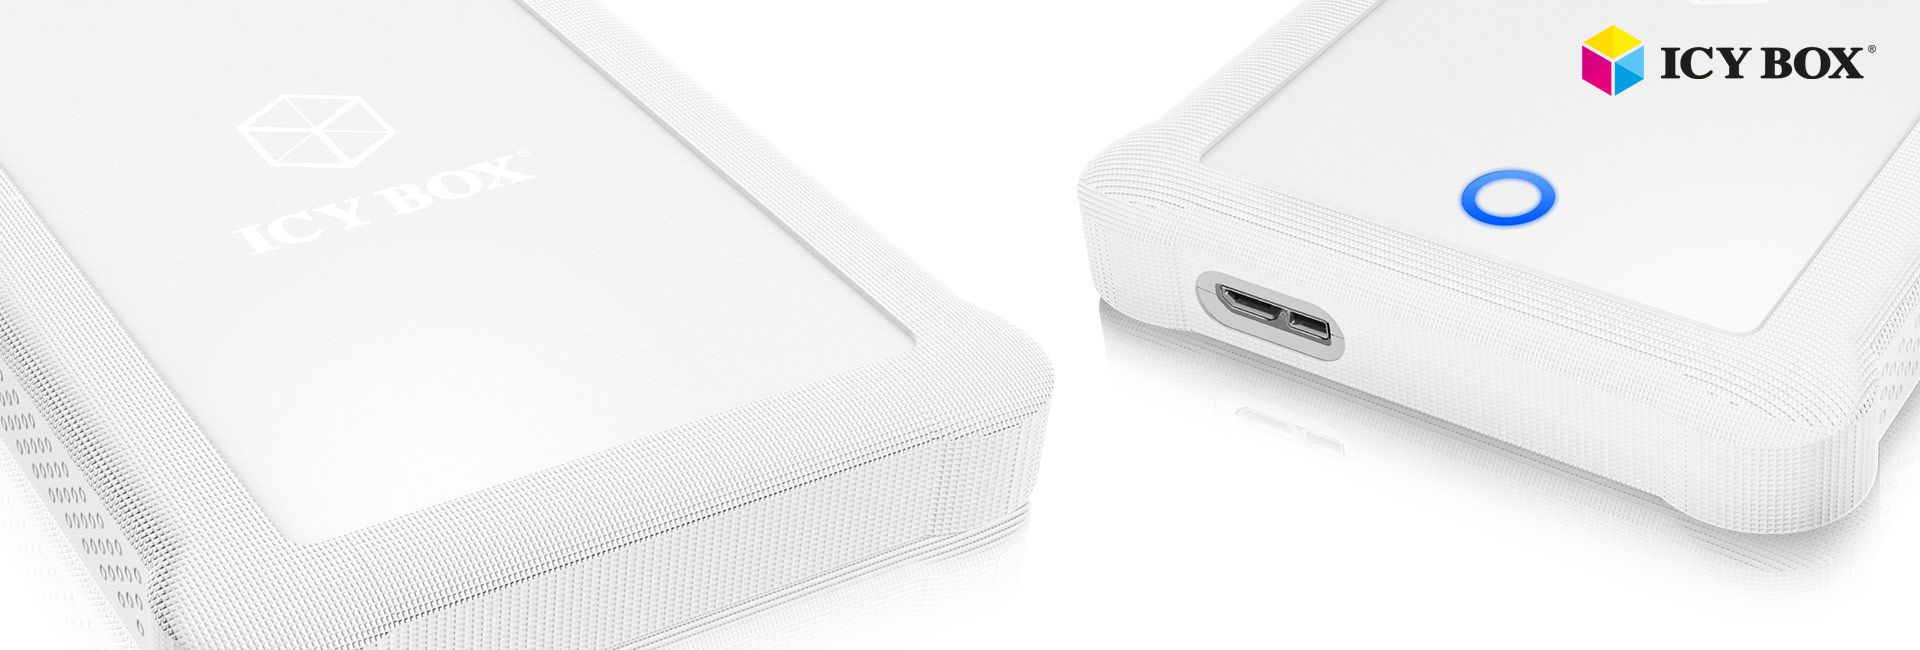 ICYBOX IB-233U3-WH IcyBox External 2,5 HDD case SATA to 1xUSB 3.0, white+ protection bag_1